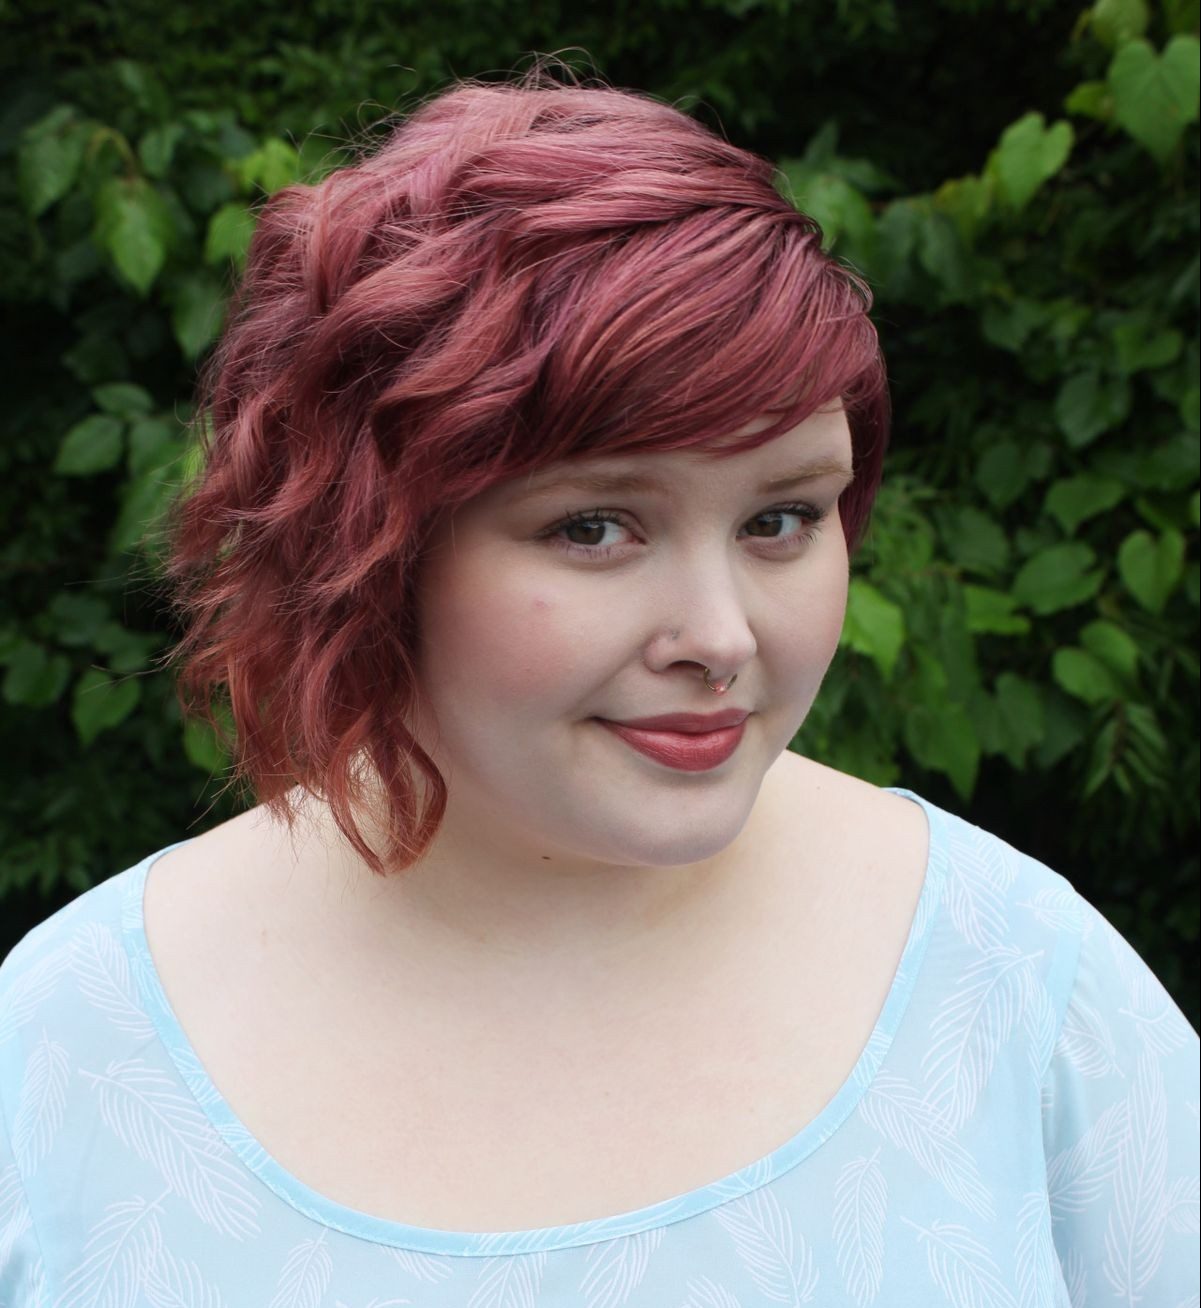 20 Stunning Hairstyles For Plus Size Women In 2020 That Look Attractive